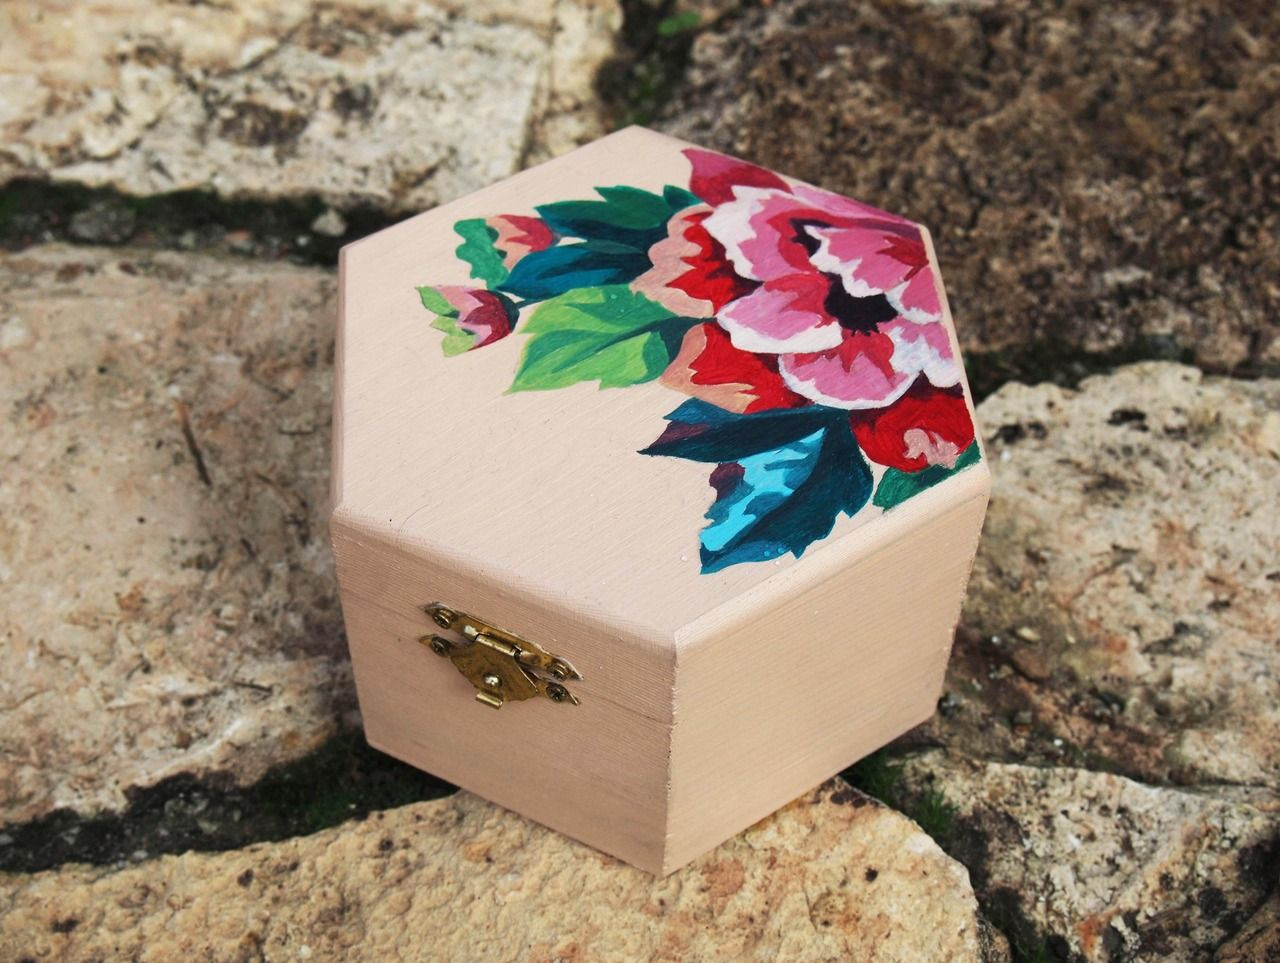 Wood Box Painting Ideas
 Hand painted wooden box with acrylics by Manuela Lendoyro